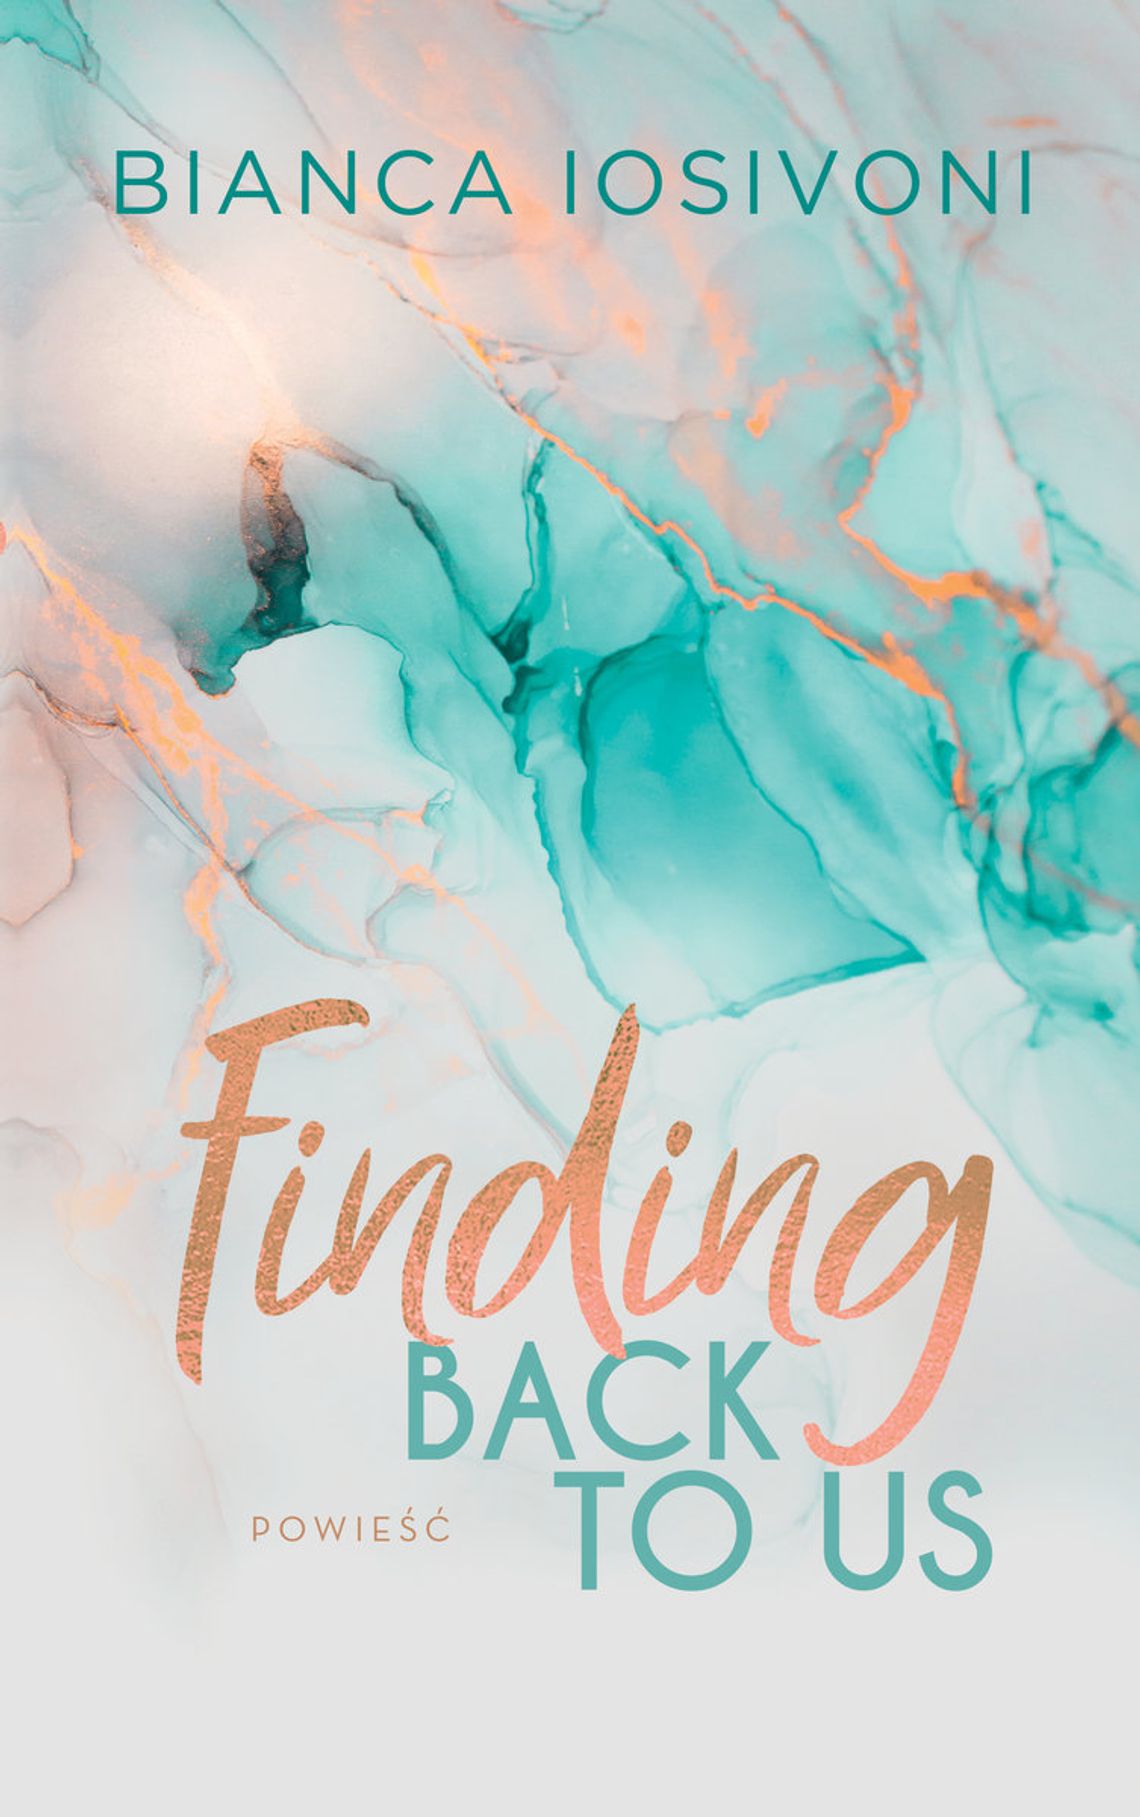 "Finding Back to Us" - Bianca Iosivoni